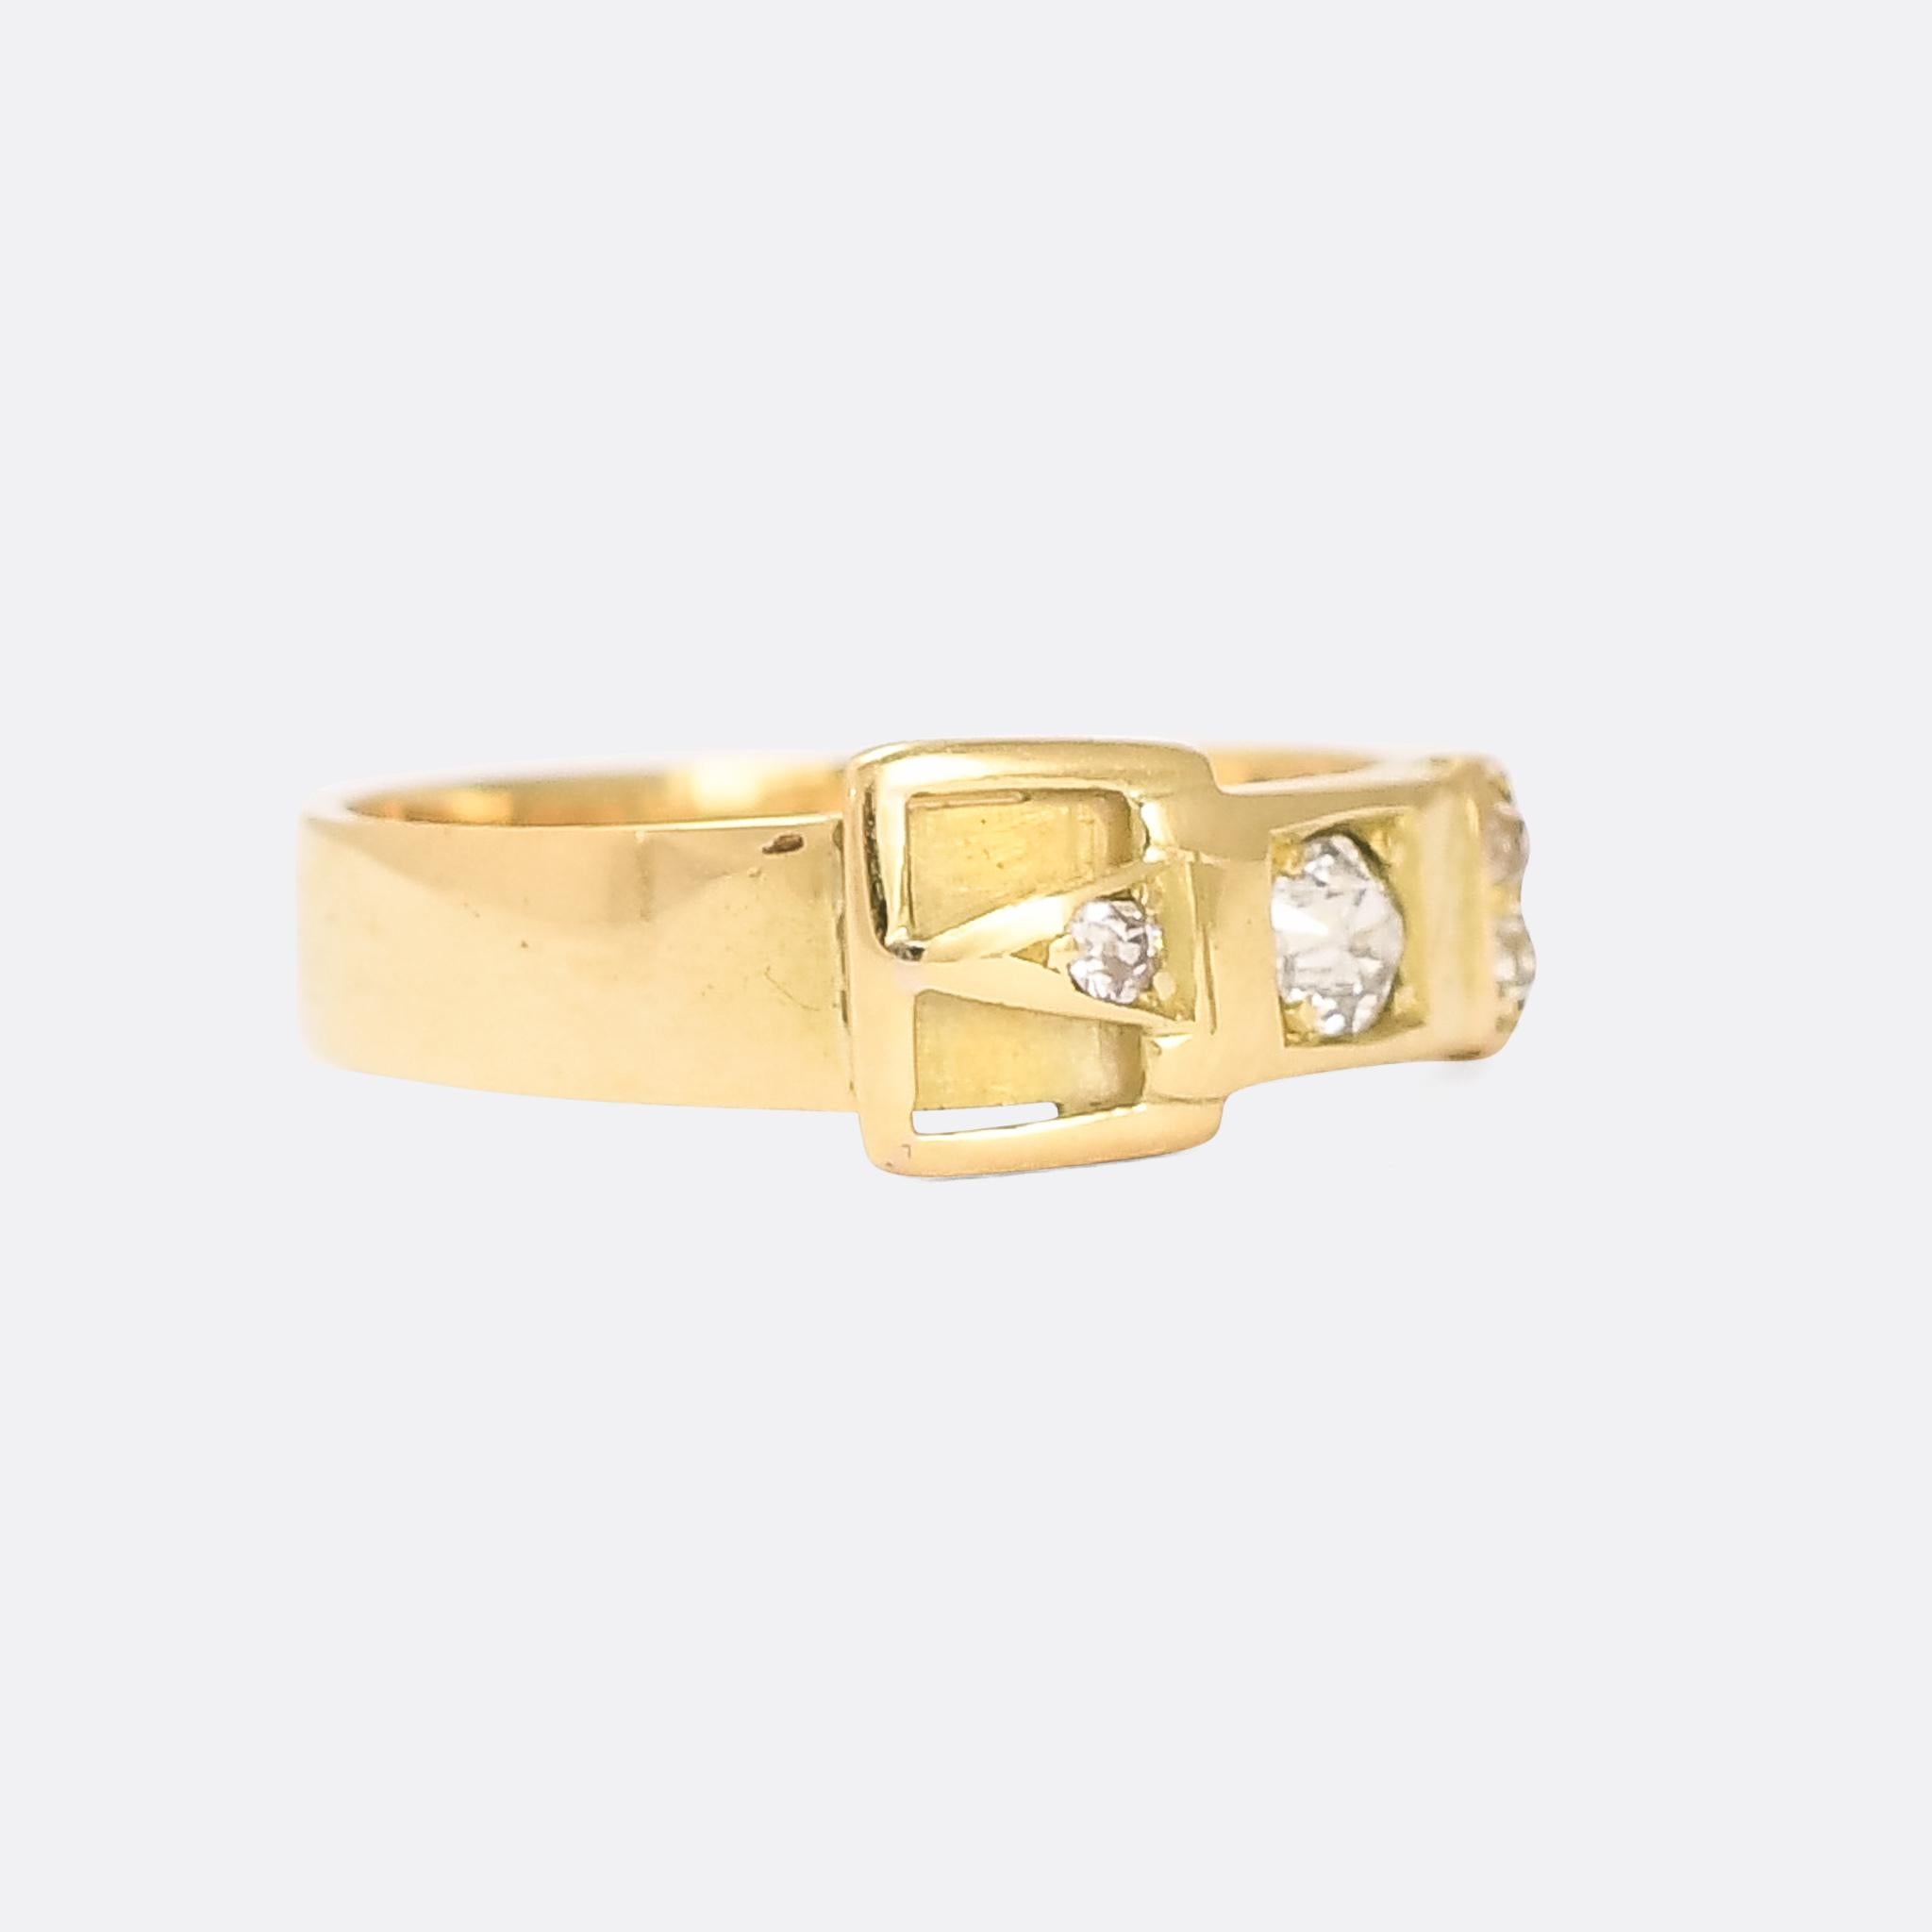 A stunning Victorian diamond-set buckle ring in 18k yellow gold. It's set with chunky old mine cut stones, totaling around 40pts, and is particularly well made and styled, with a low profile on the finger. Dating to the latter half of the 19th